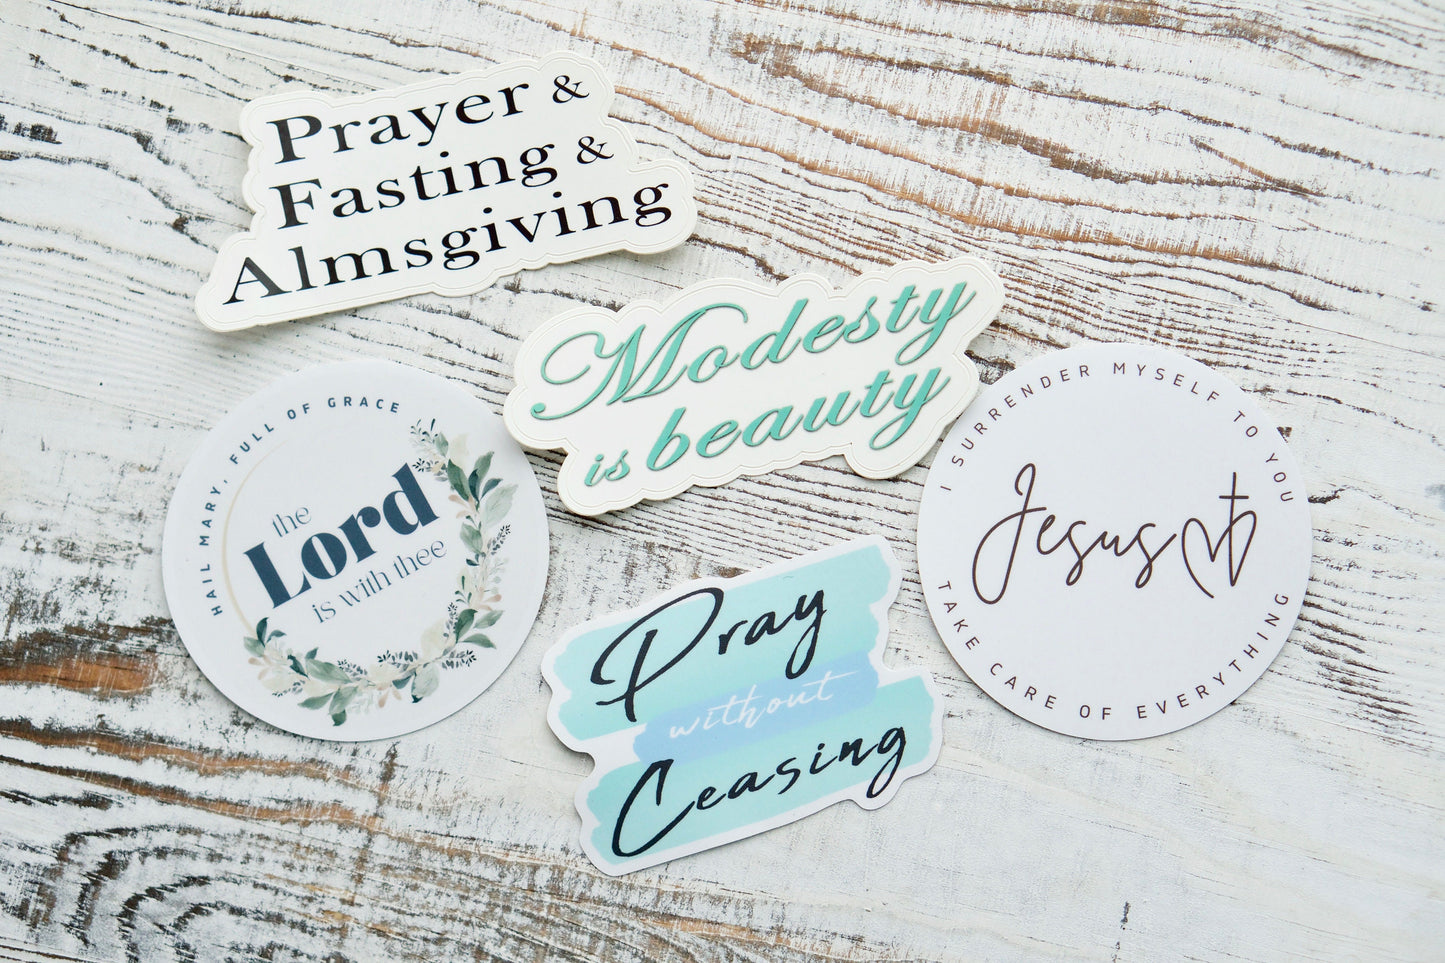 Unleash the Power of Faith with Our Sticker Assortment - 5 Pack - Spread the Message of God's Protection with Durable Vinyl Stickers for Your Gadgets and More. Perfect Catholic Gift Idea!